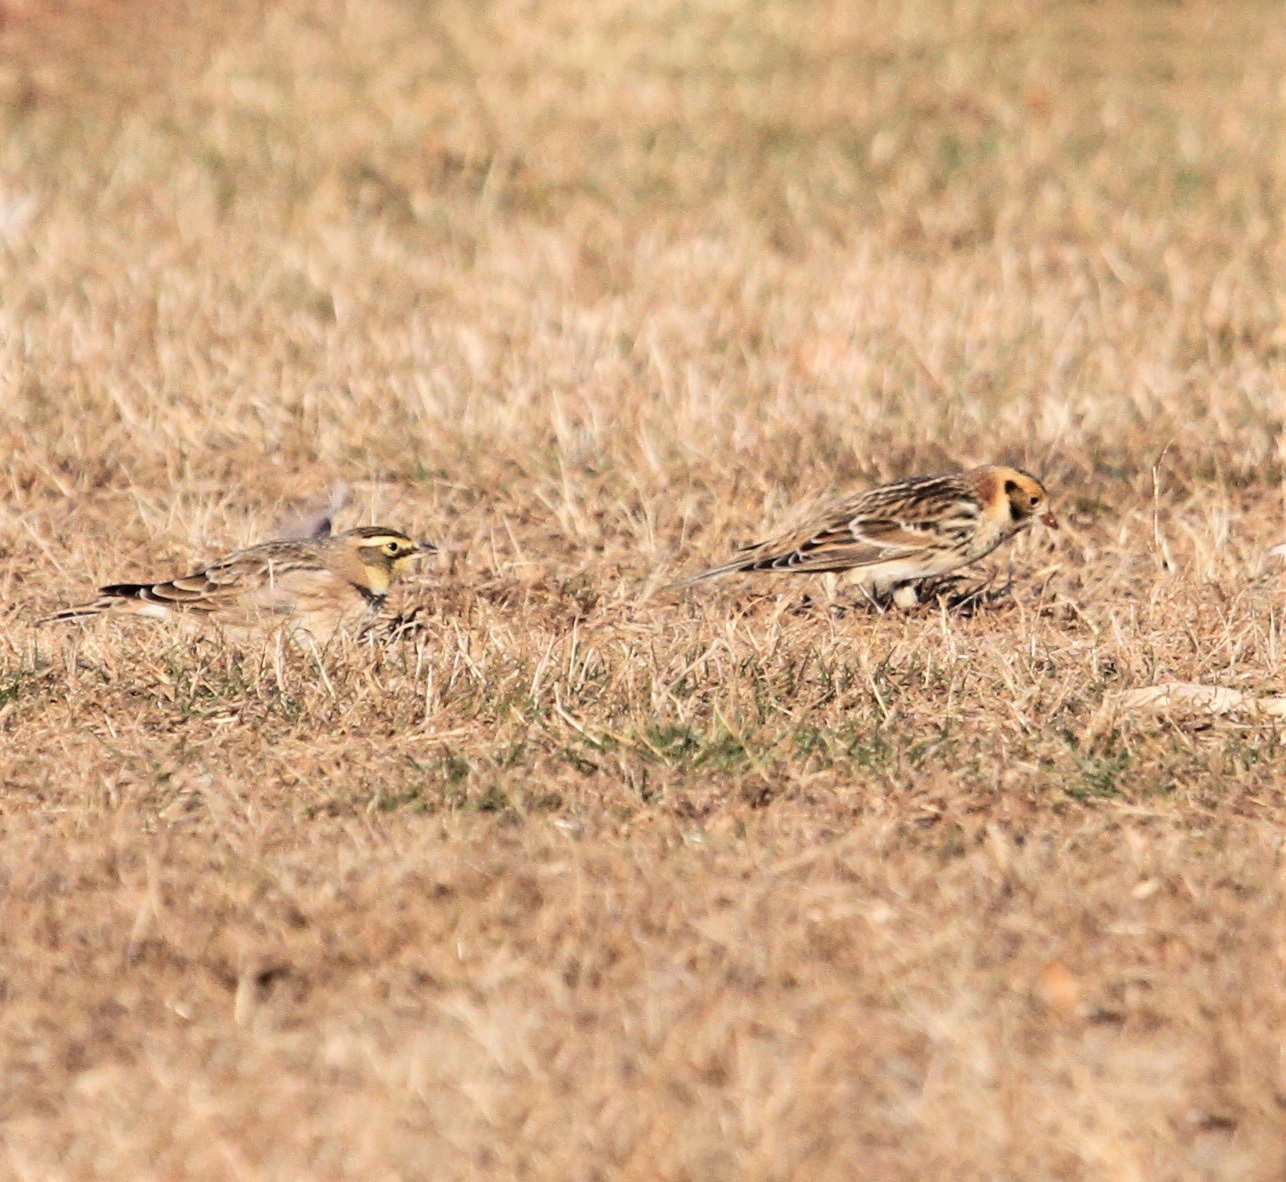 Birders scan the Parade Ground carefully for unusual species such as this Lapland Longspur, foraging in the grass with Horned Larks. Photo: Anders Peltomaa